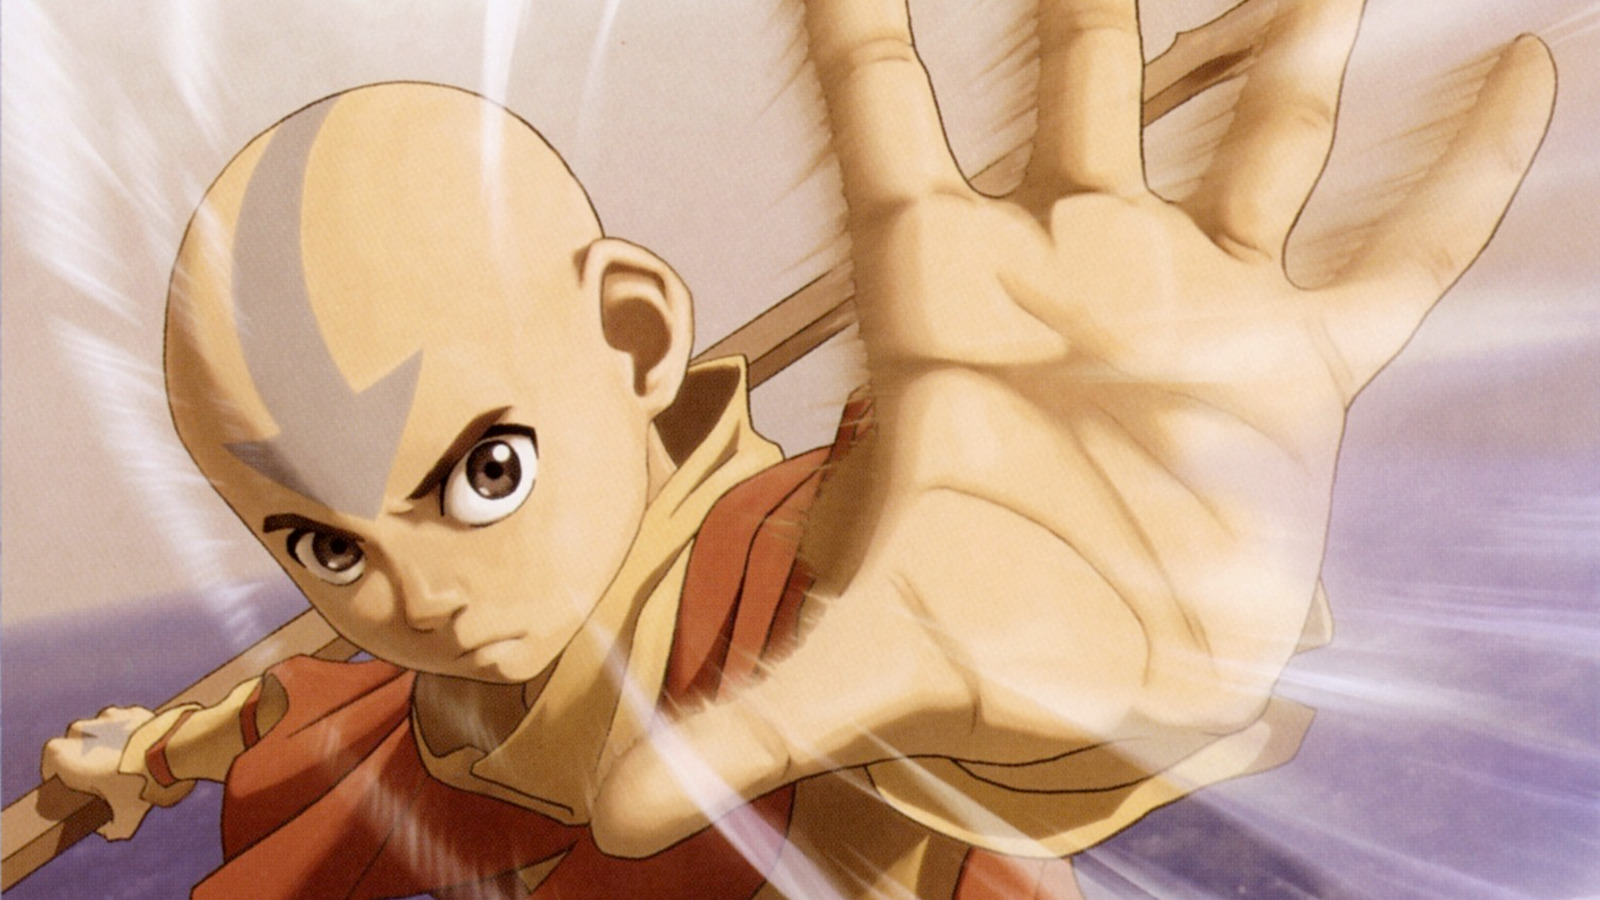 Avatar The Last Airbender Aang Wallpapers Hd Desktop And Mobile Backgrounds 4808